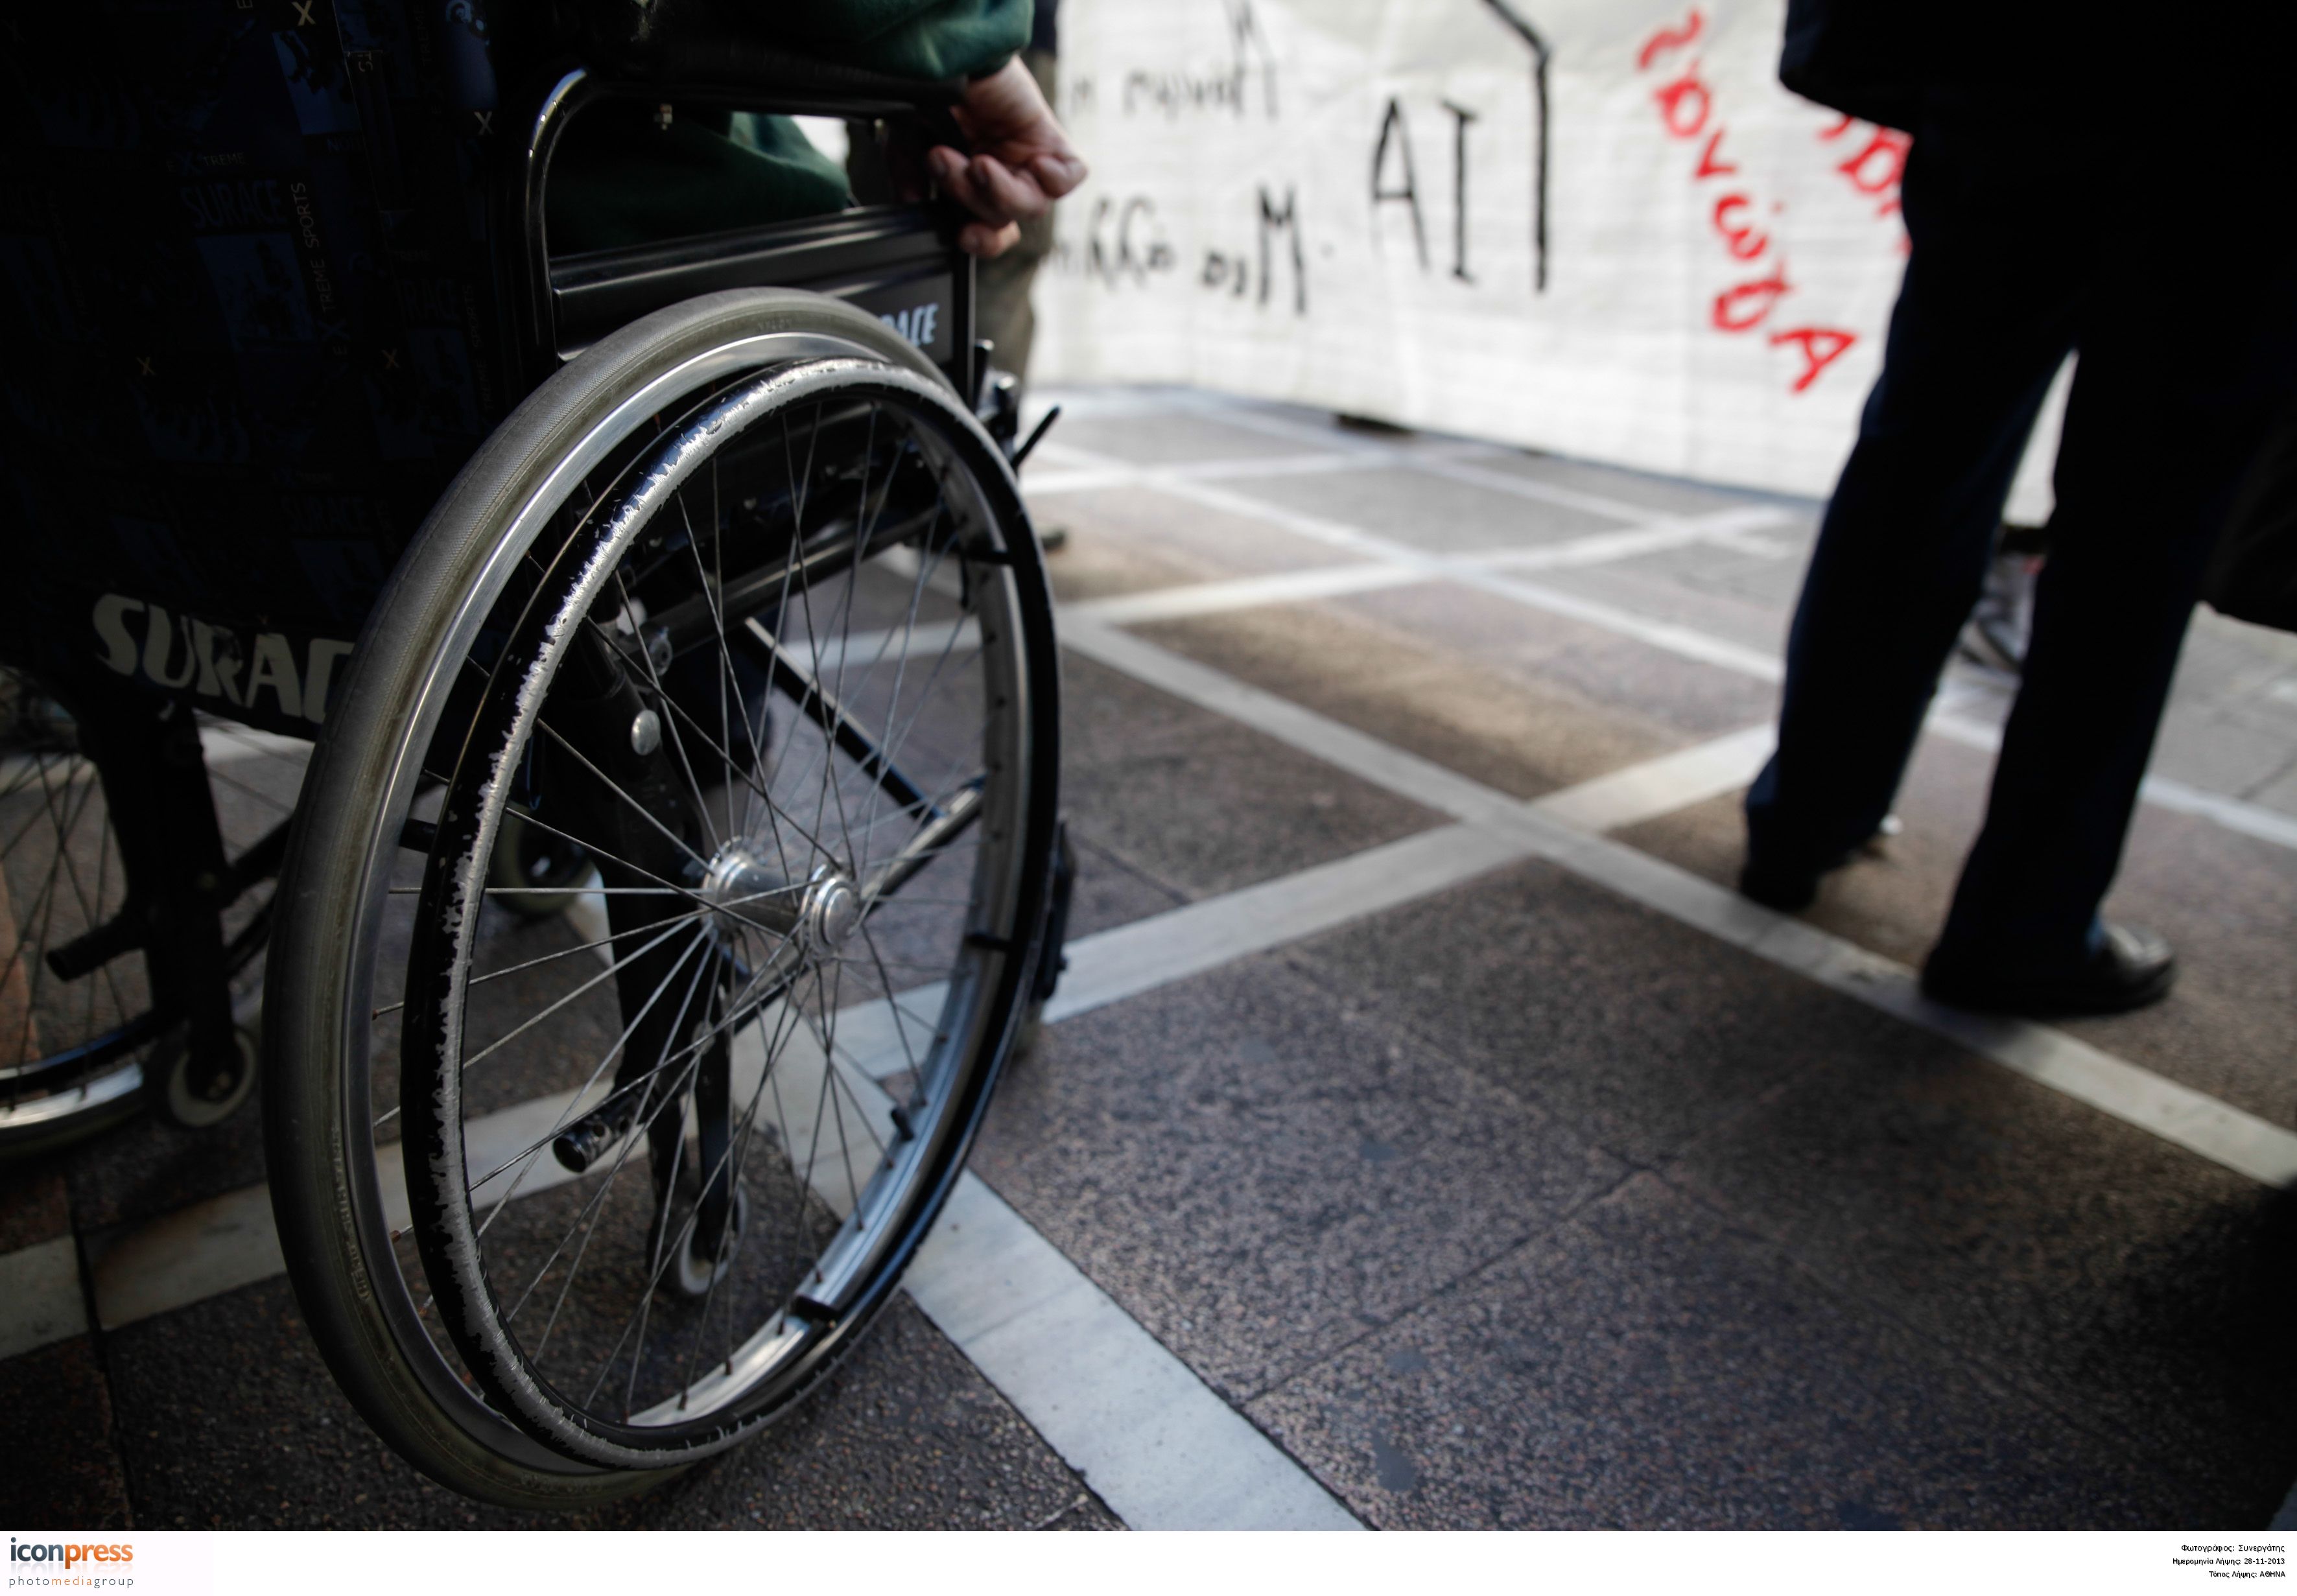 Social security reform to affect disability pensions